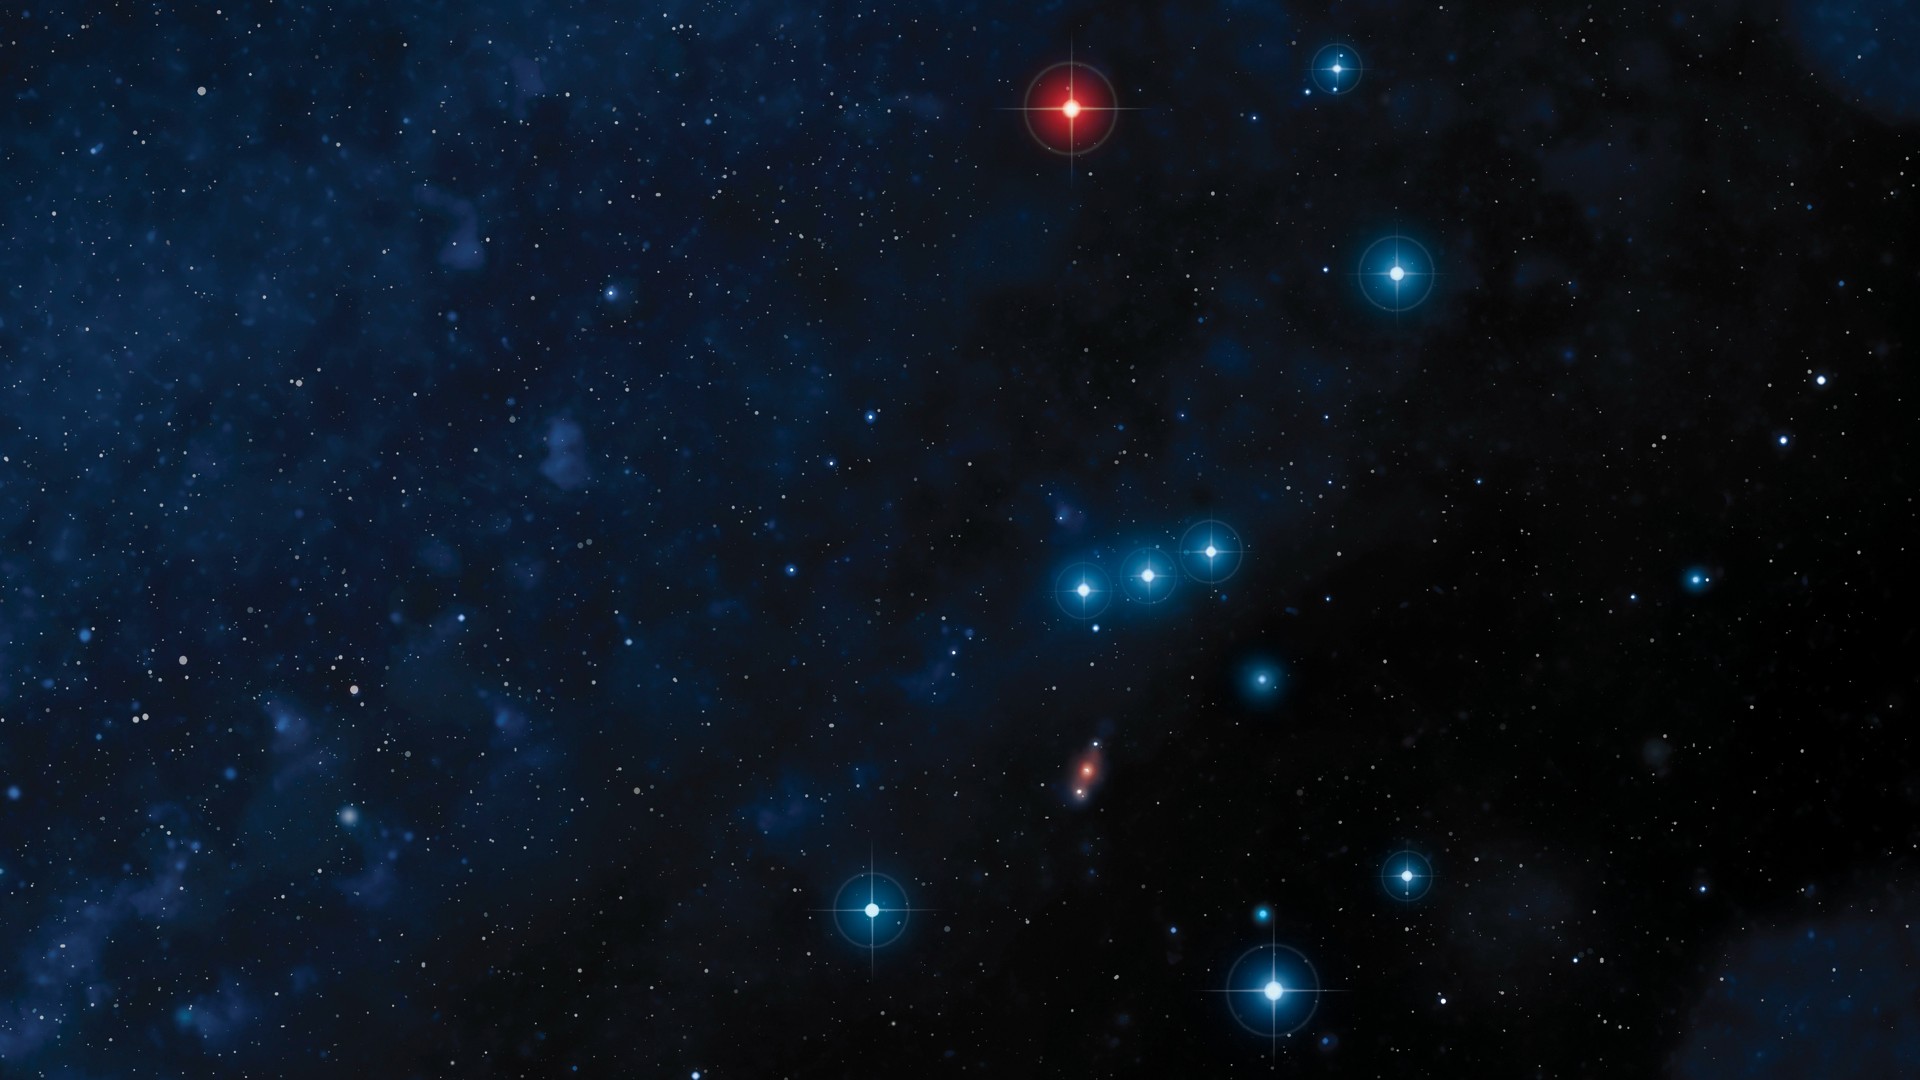 an illustration of the orion constellation in the night sky